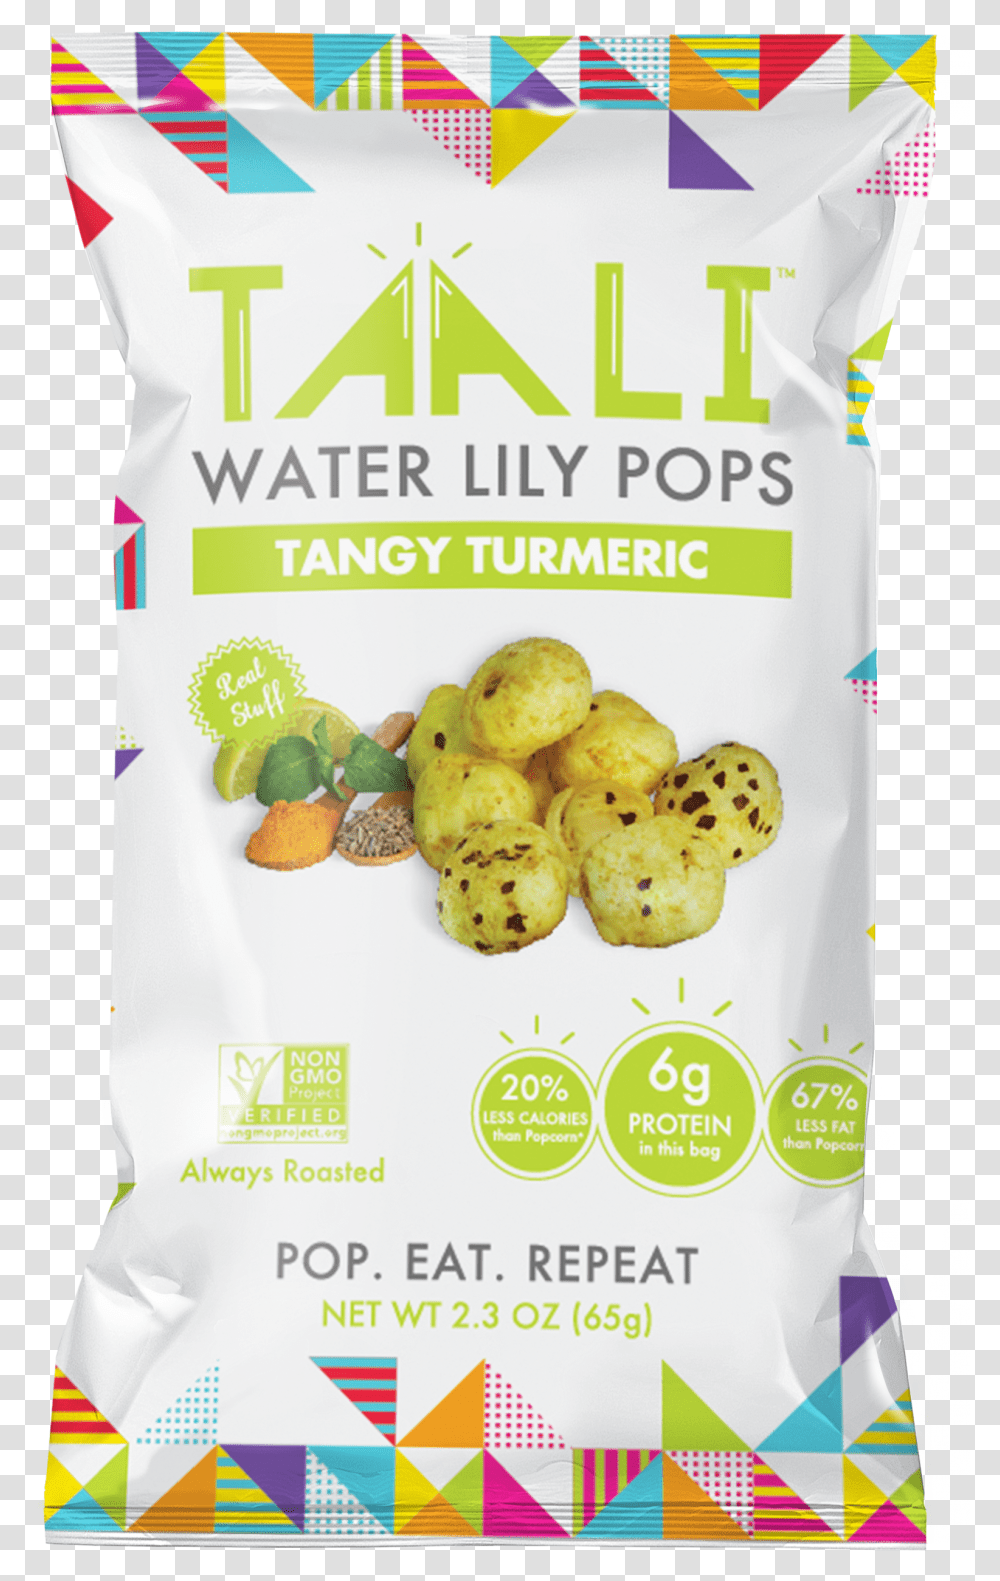 Tangy Turmeric Water Lily Pops Taali Water Lily Pops Transparent Png